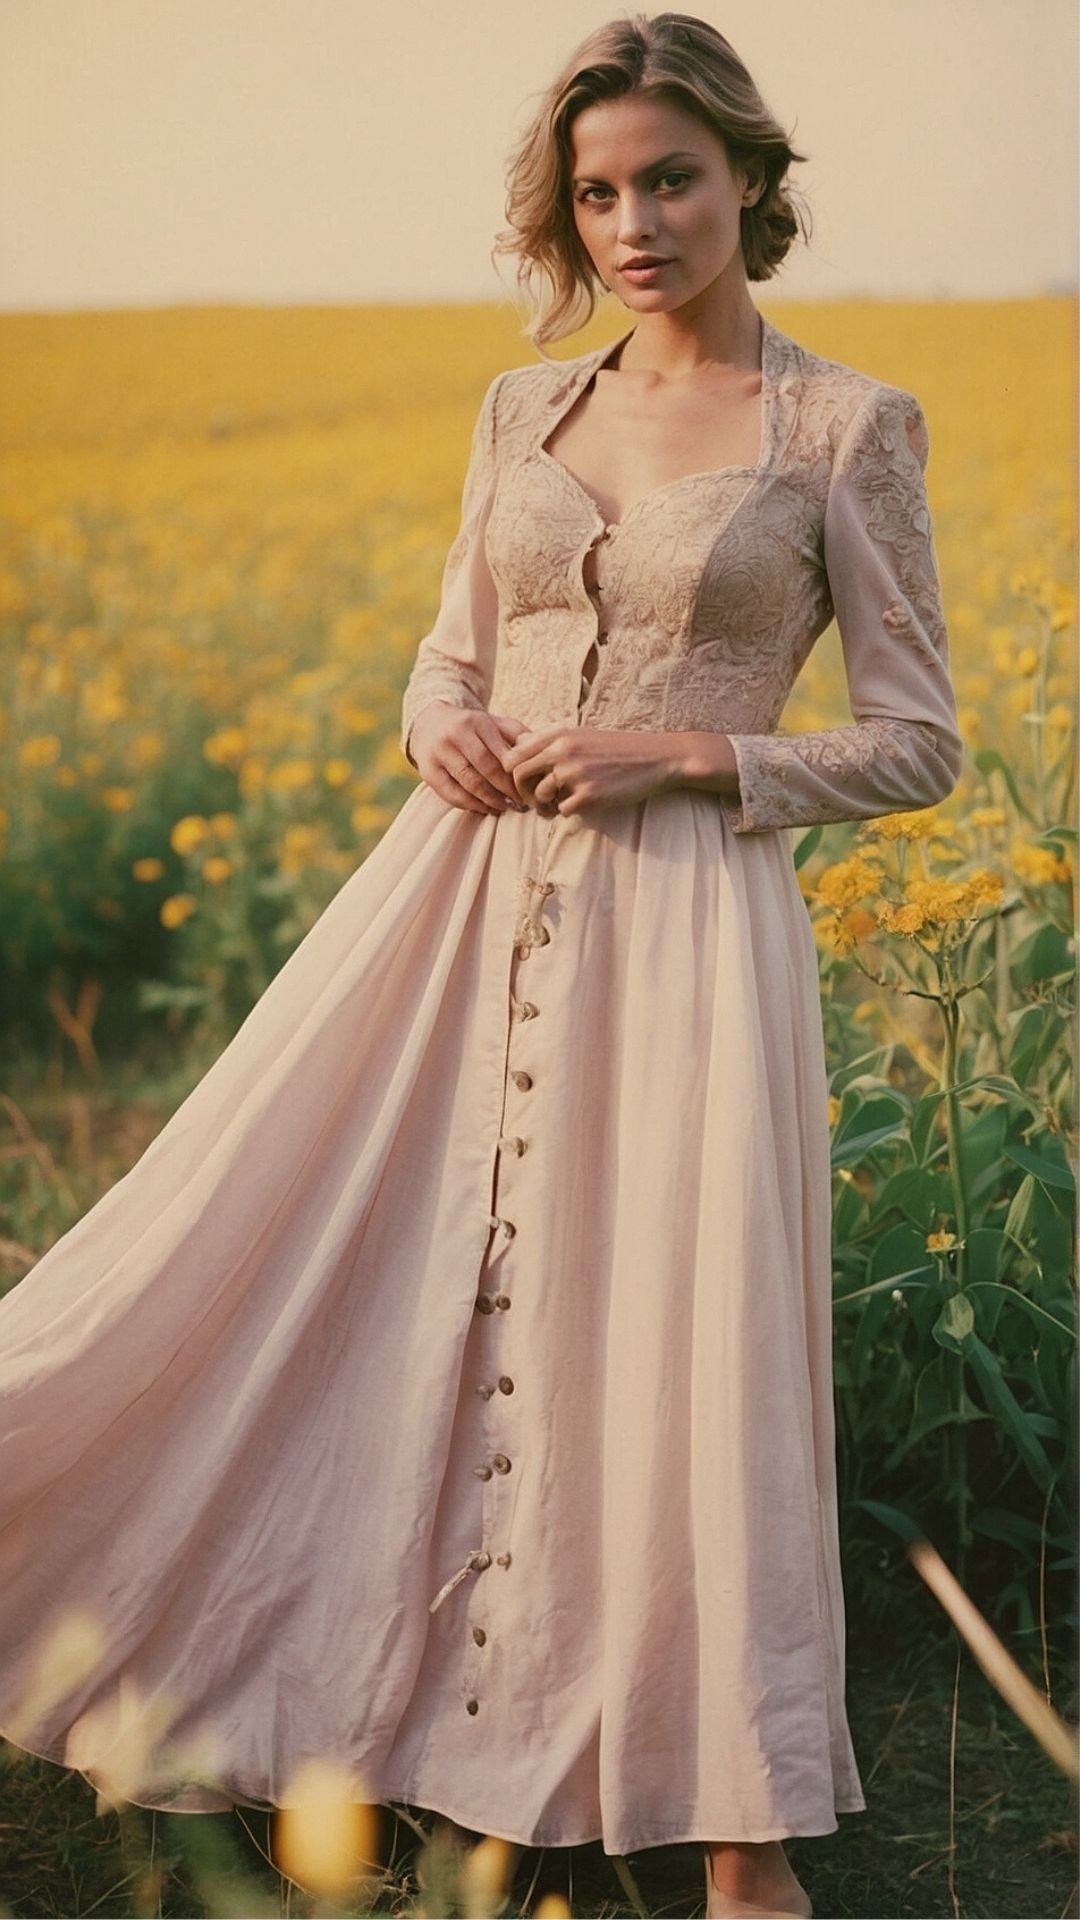 Golden Fields Romance: Vintage Lace in Nature's Glow